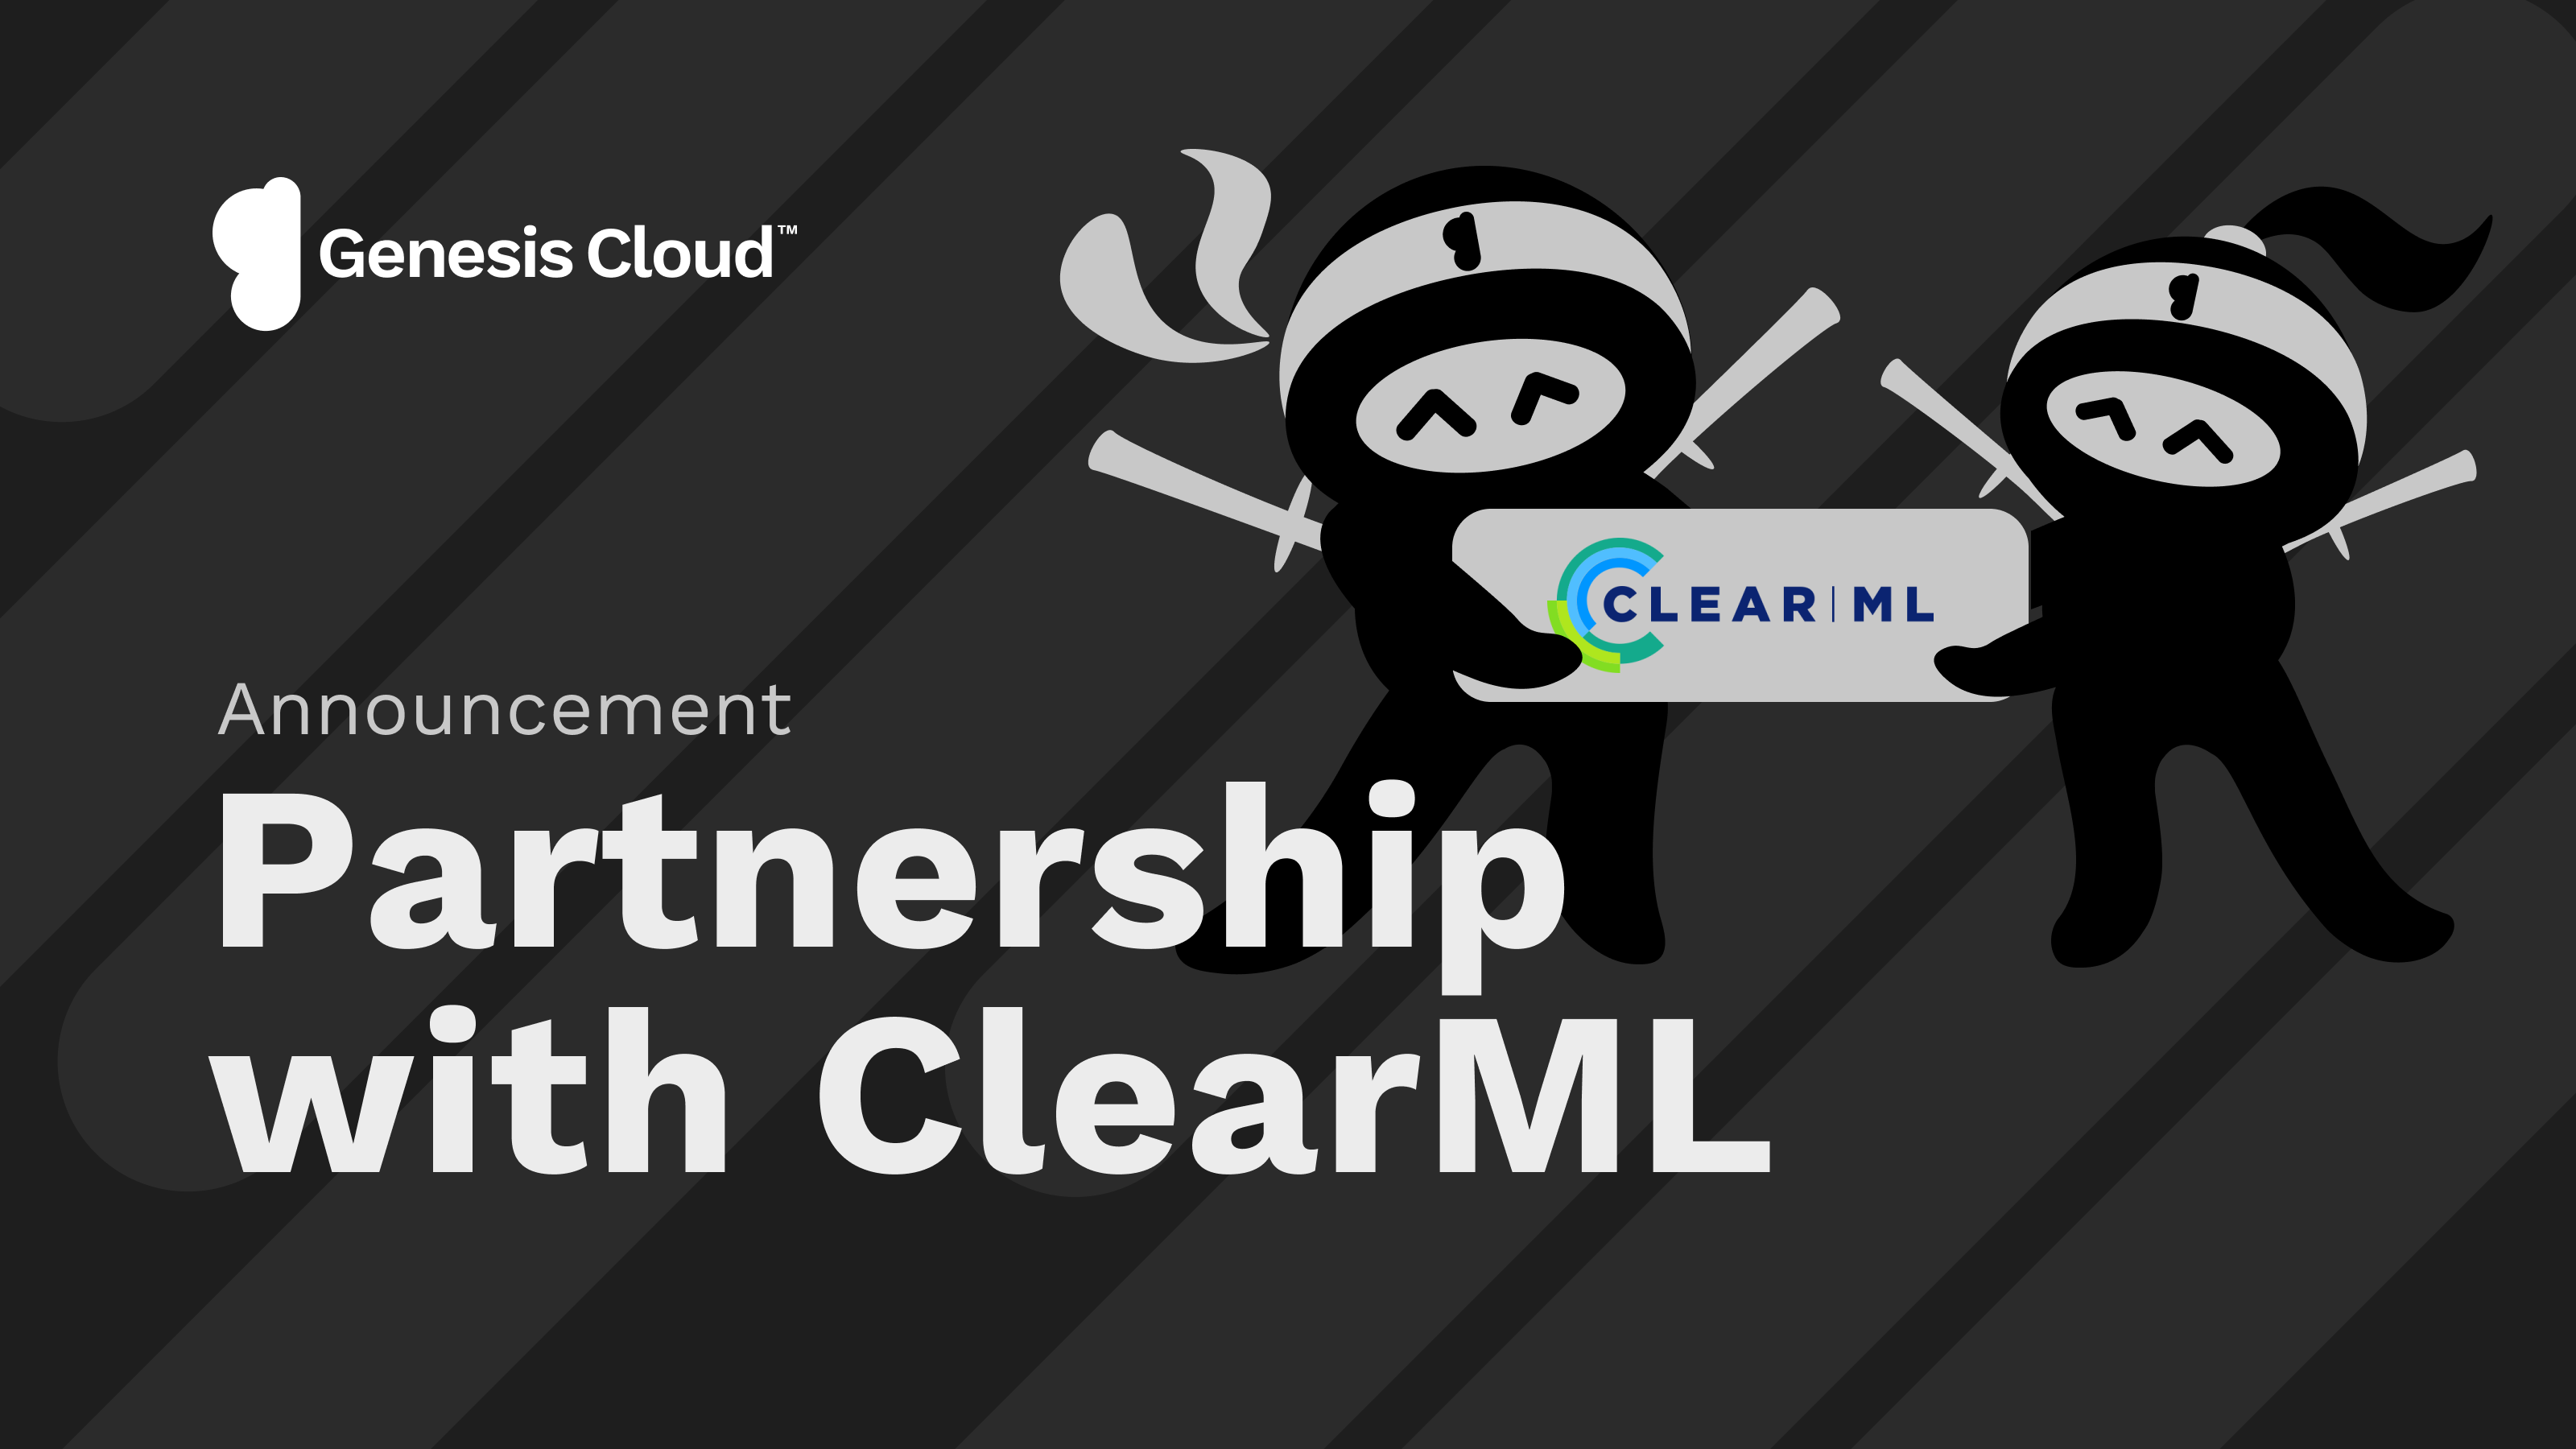 New Partnership: ClearML and Genesis Cloud join forces in delivering Green Energy Compute Solution for Machine Learning and MLOps Teams